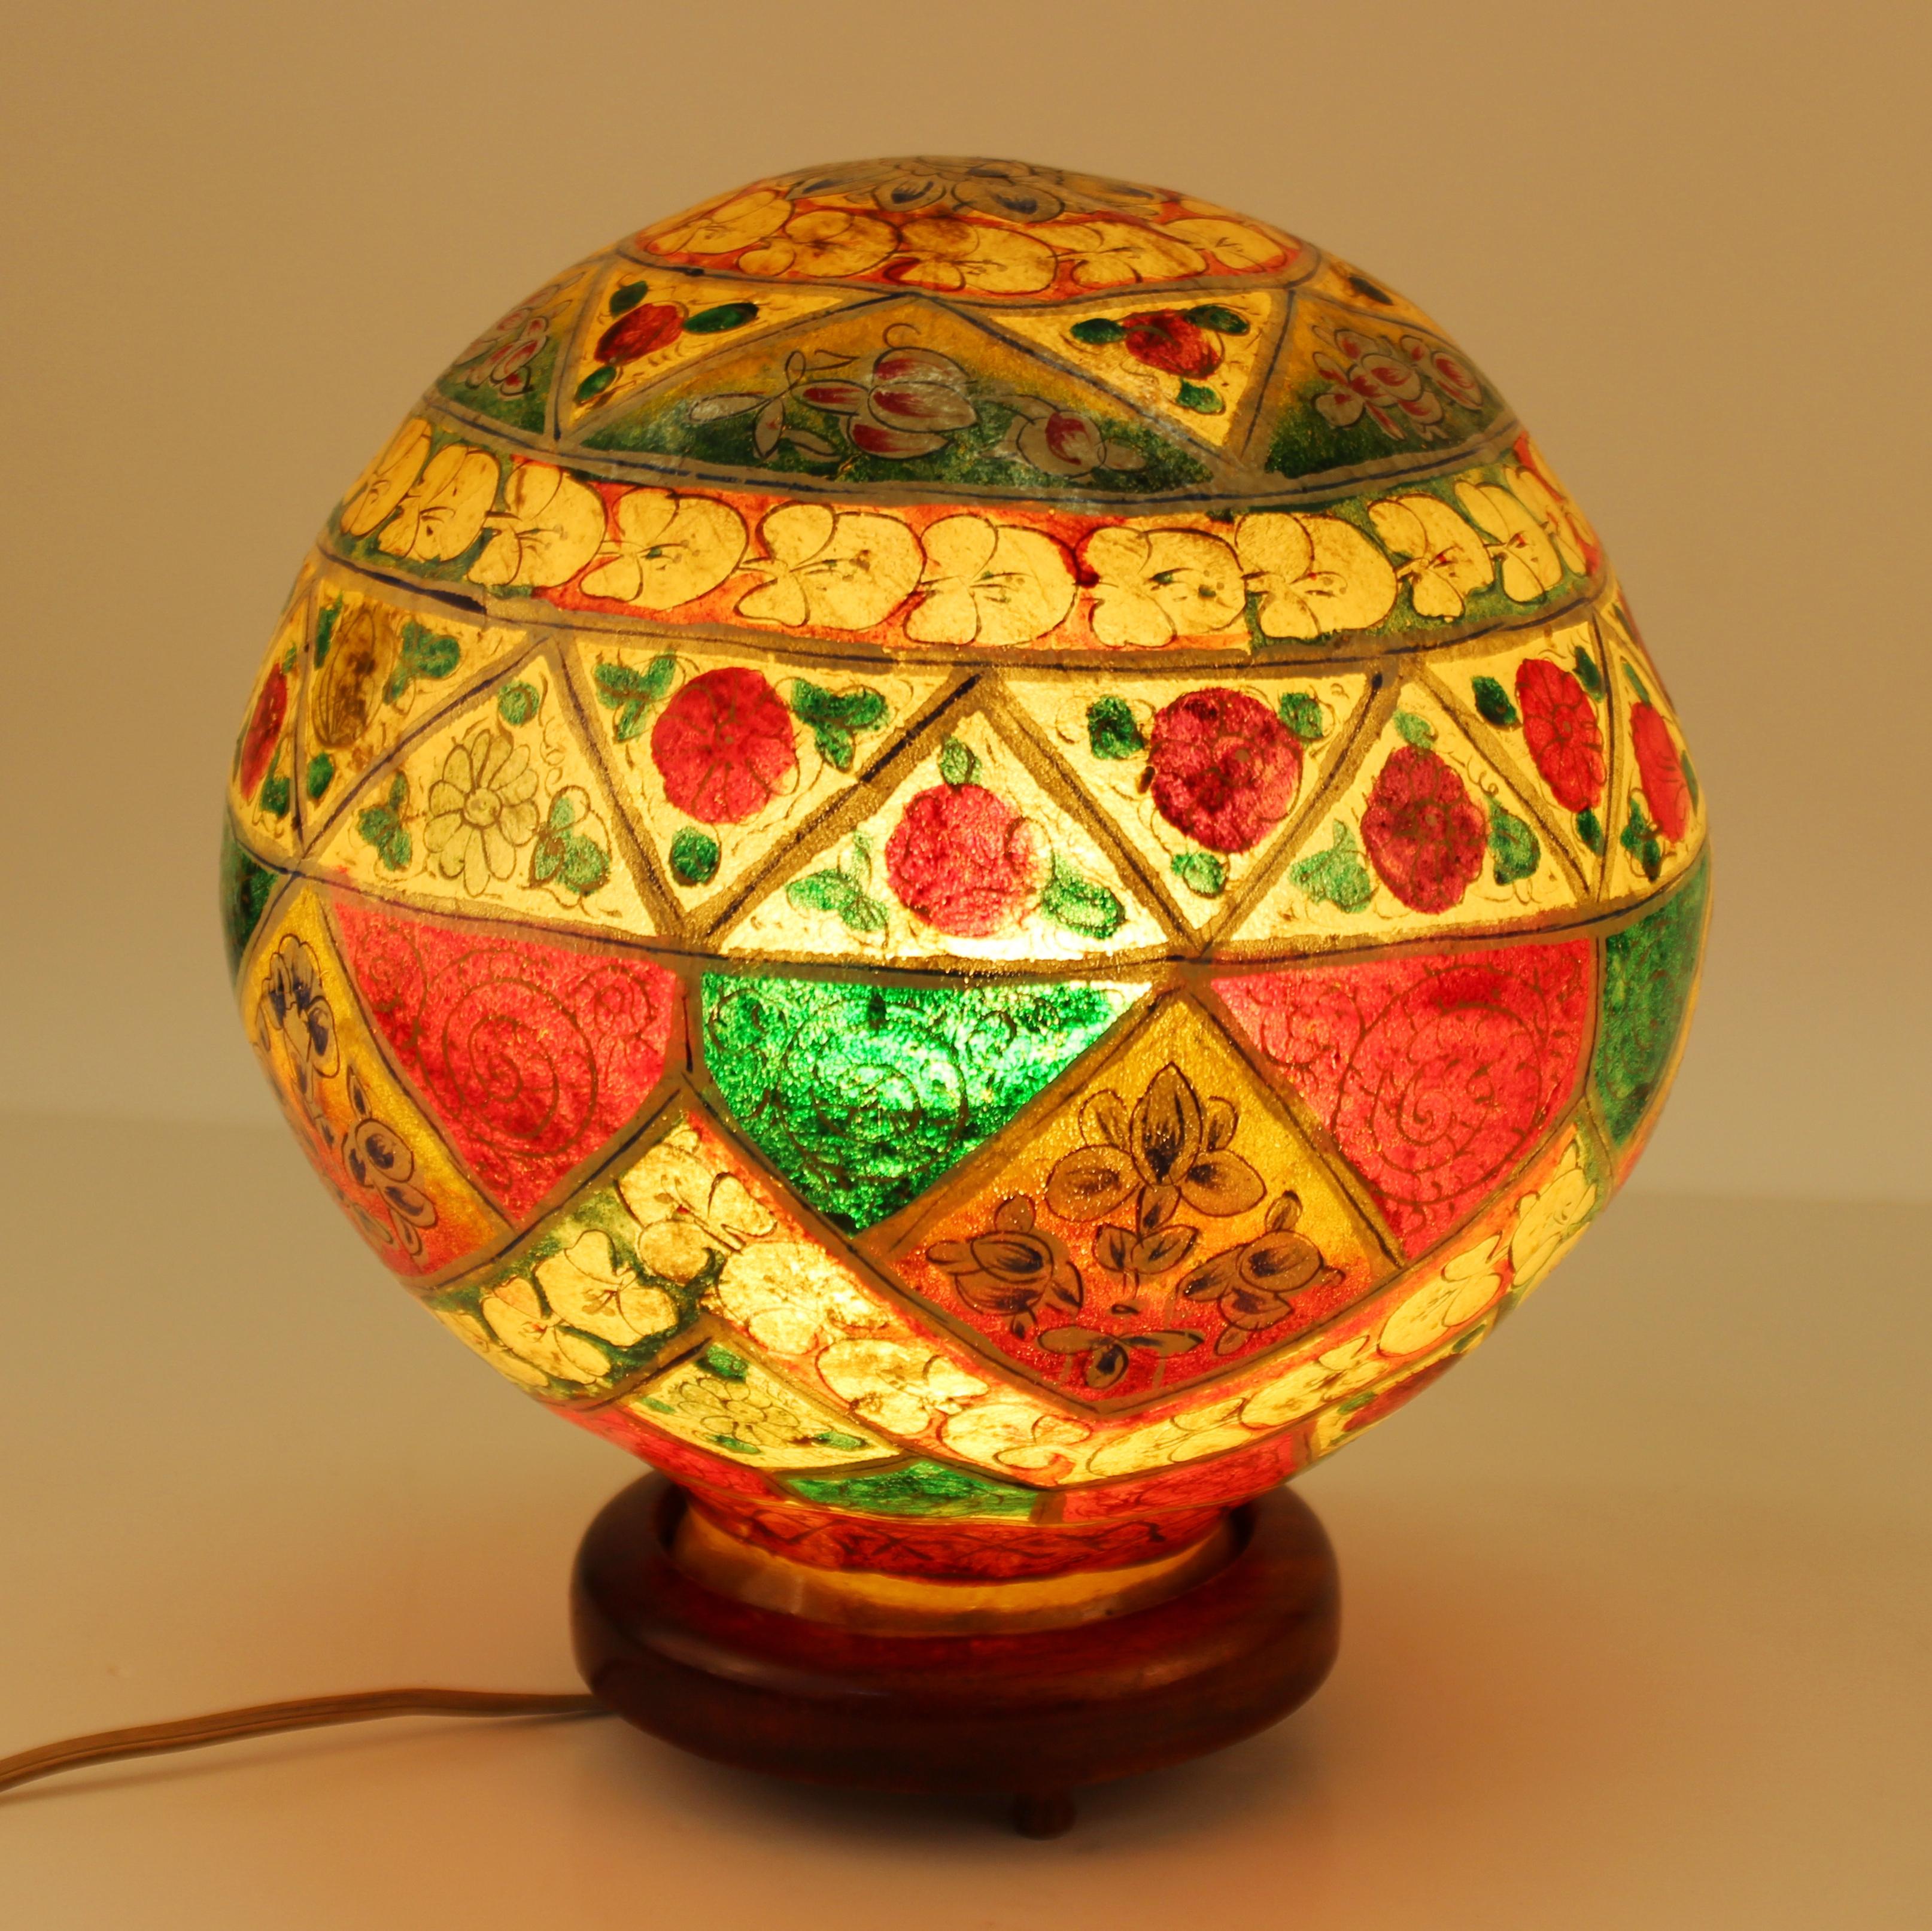 Moroccan midcentury period hand painted camel skin table lamp. The spherical shaped lamp has a profusion of hand painted tribal motifs and comes off the wooden base to access the bulb. In great vintage condition with age-appropriate wear to the